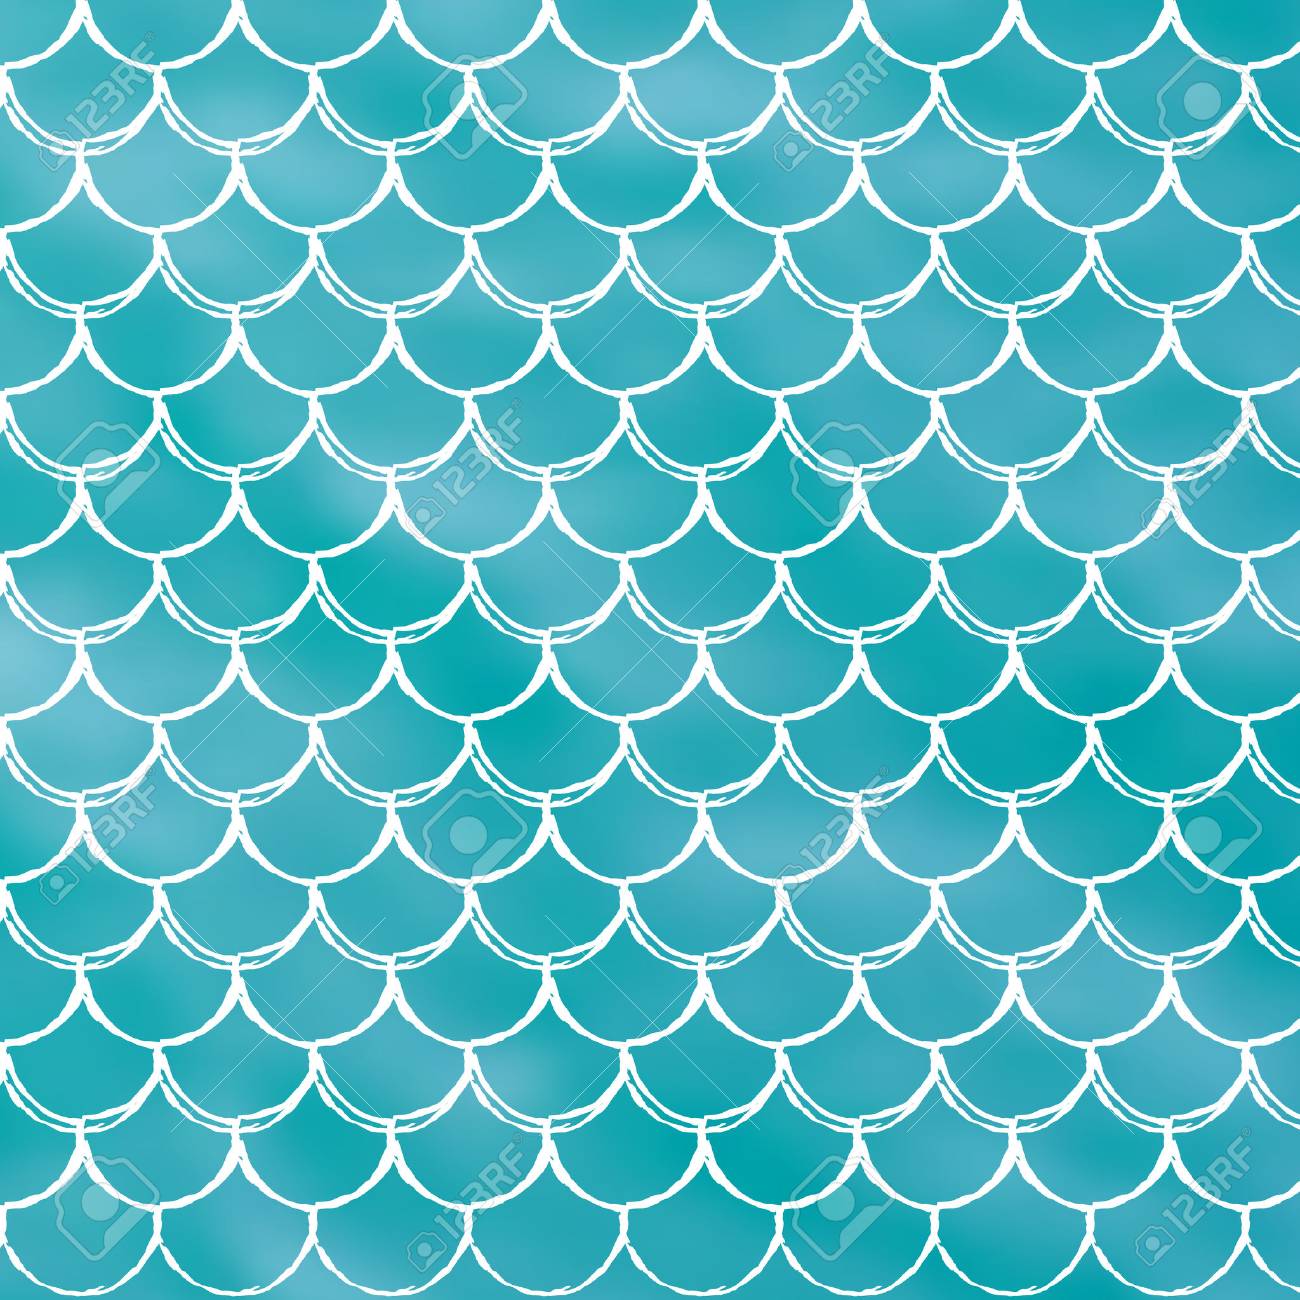 mermaid scales clipart 10 free Cliparts | Download images ...